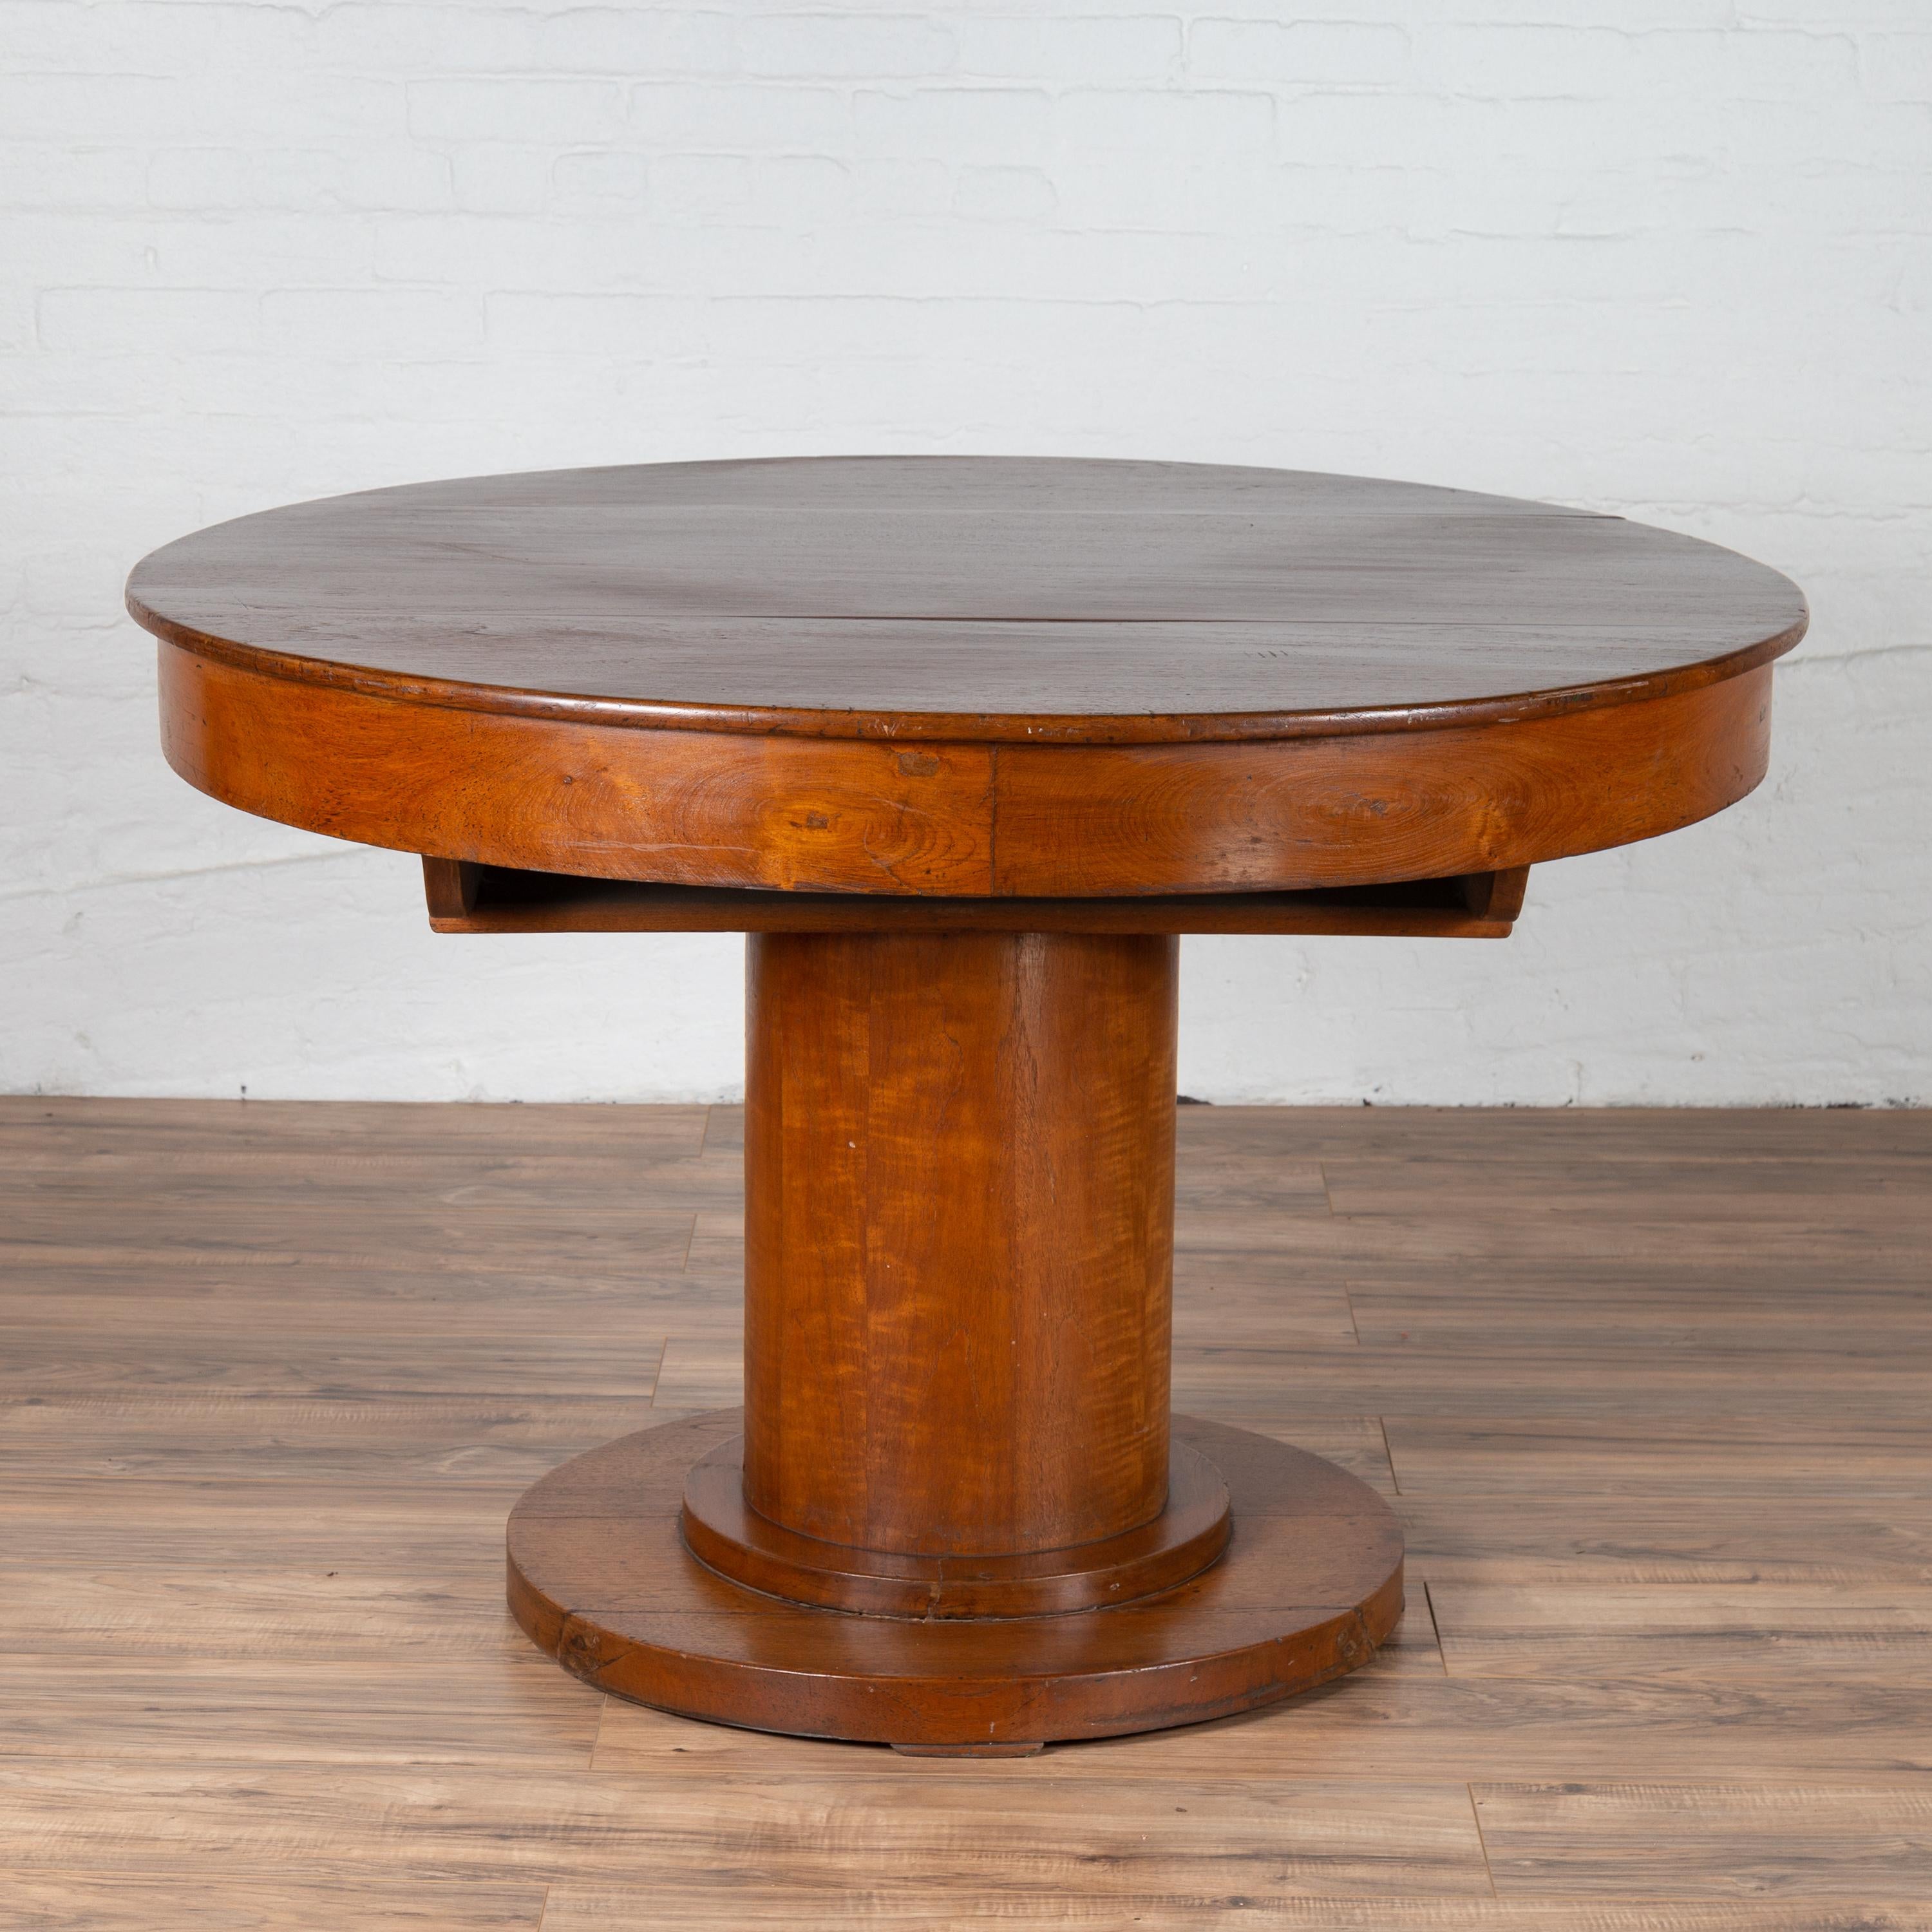 A vintage Dutch Colonial Javanese teak pedestal dining table from the mid-20th century, with circular top and cylindrical base. Born on the Island of Java during the midcentury period, this elegant pedestal table features a round planked top,